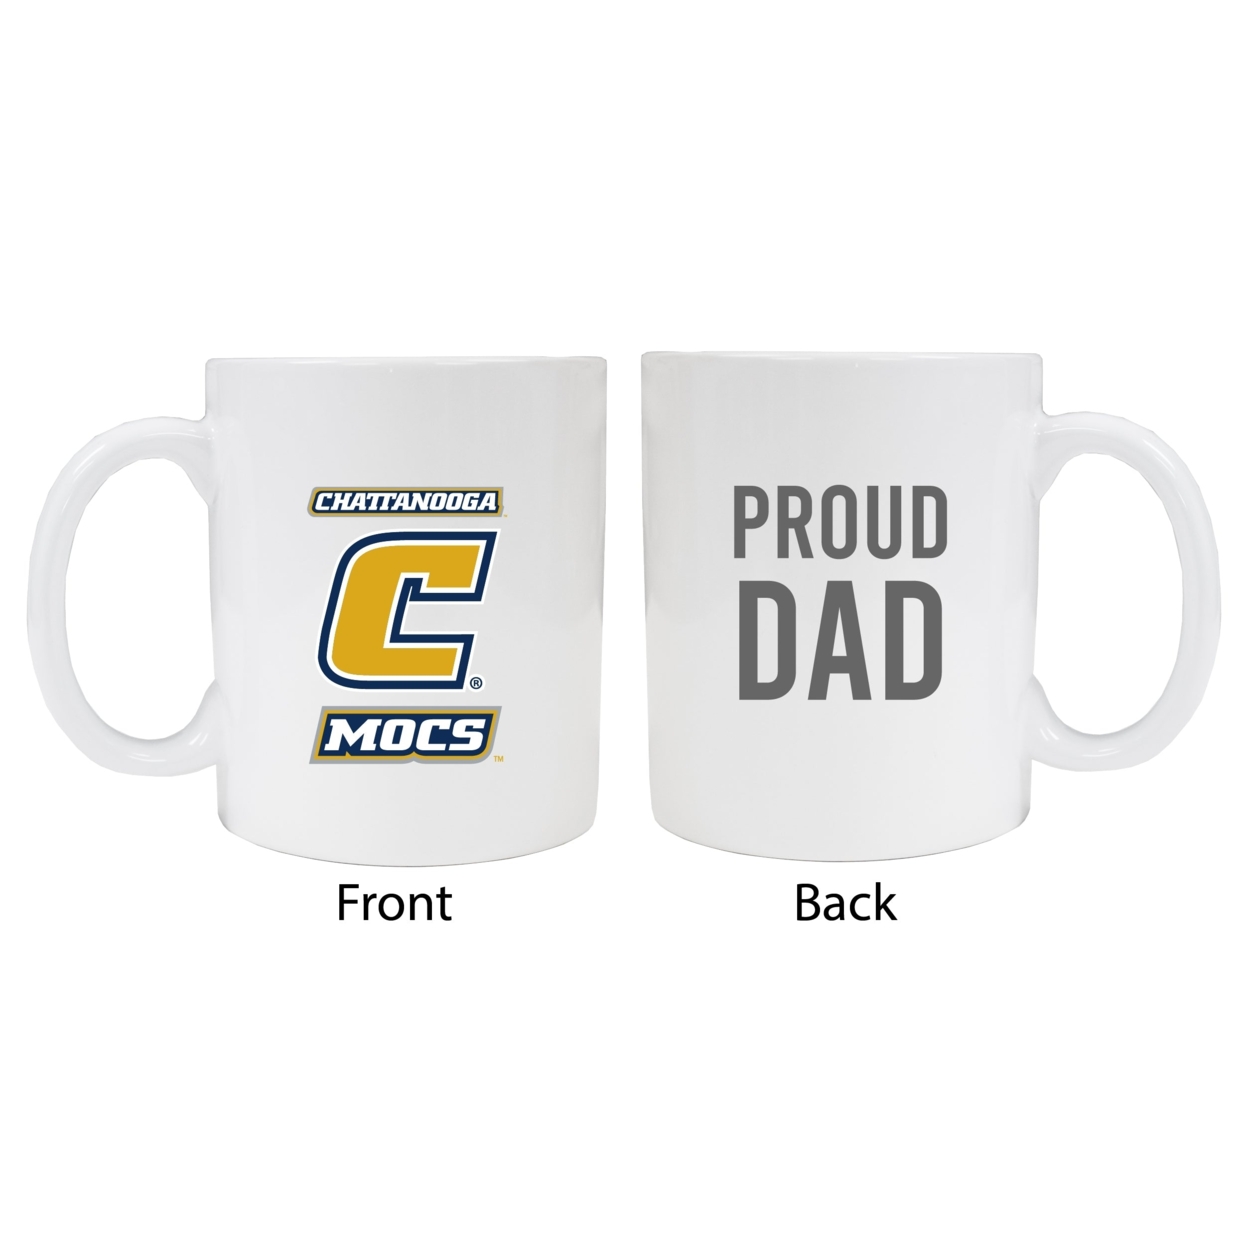 University Of Tennessee At Chattanooga Proud Dad Ceramic Coffee Mug - White (2 Pack)